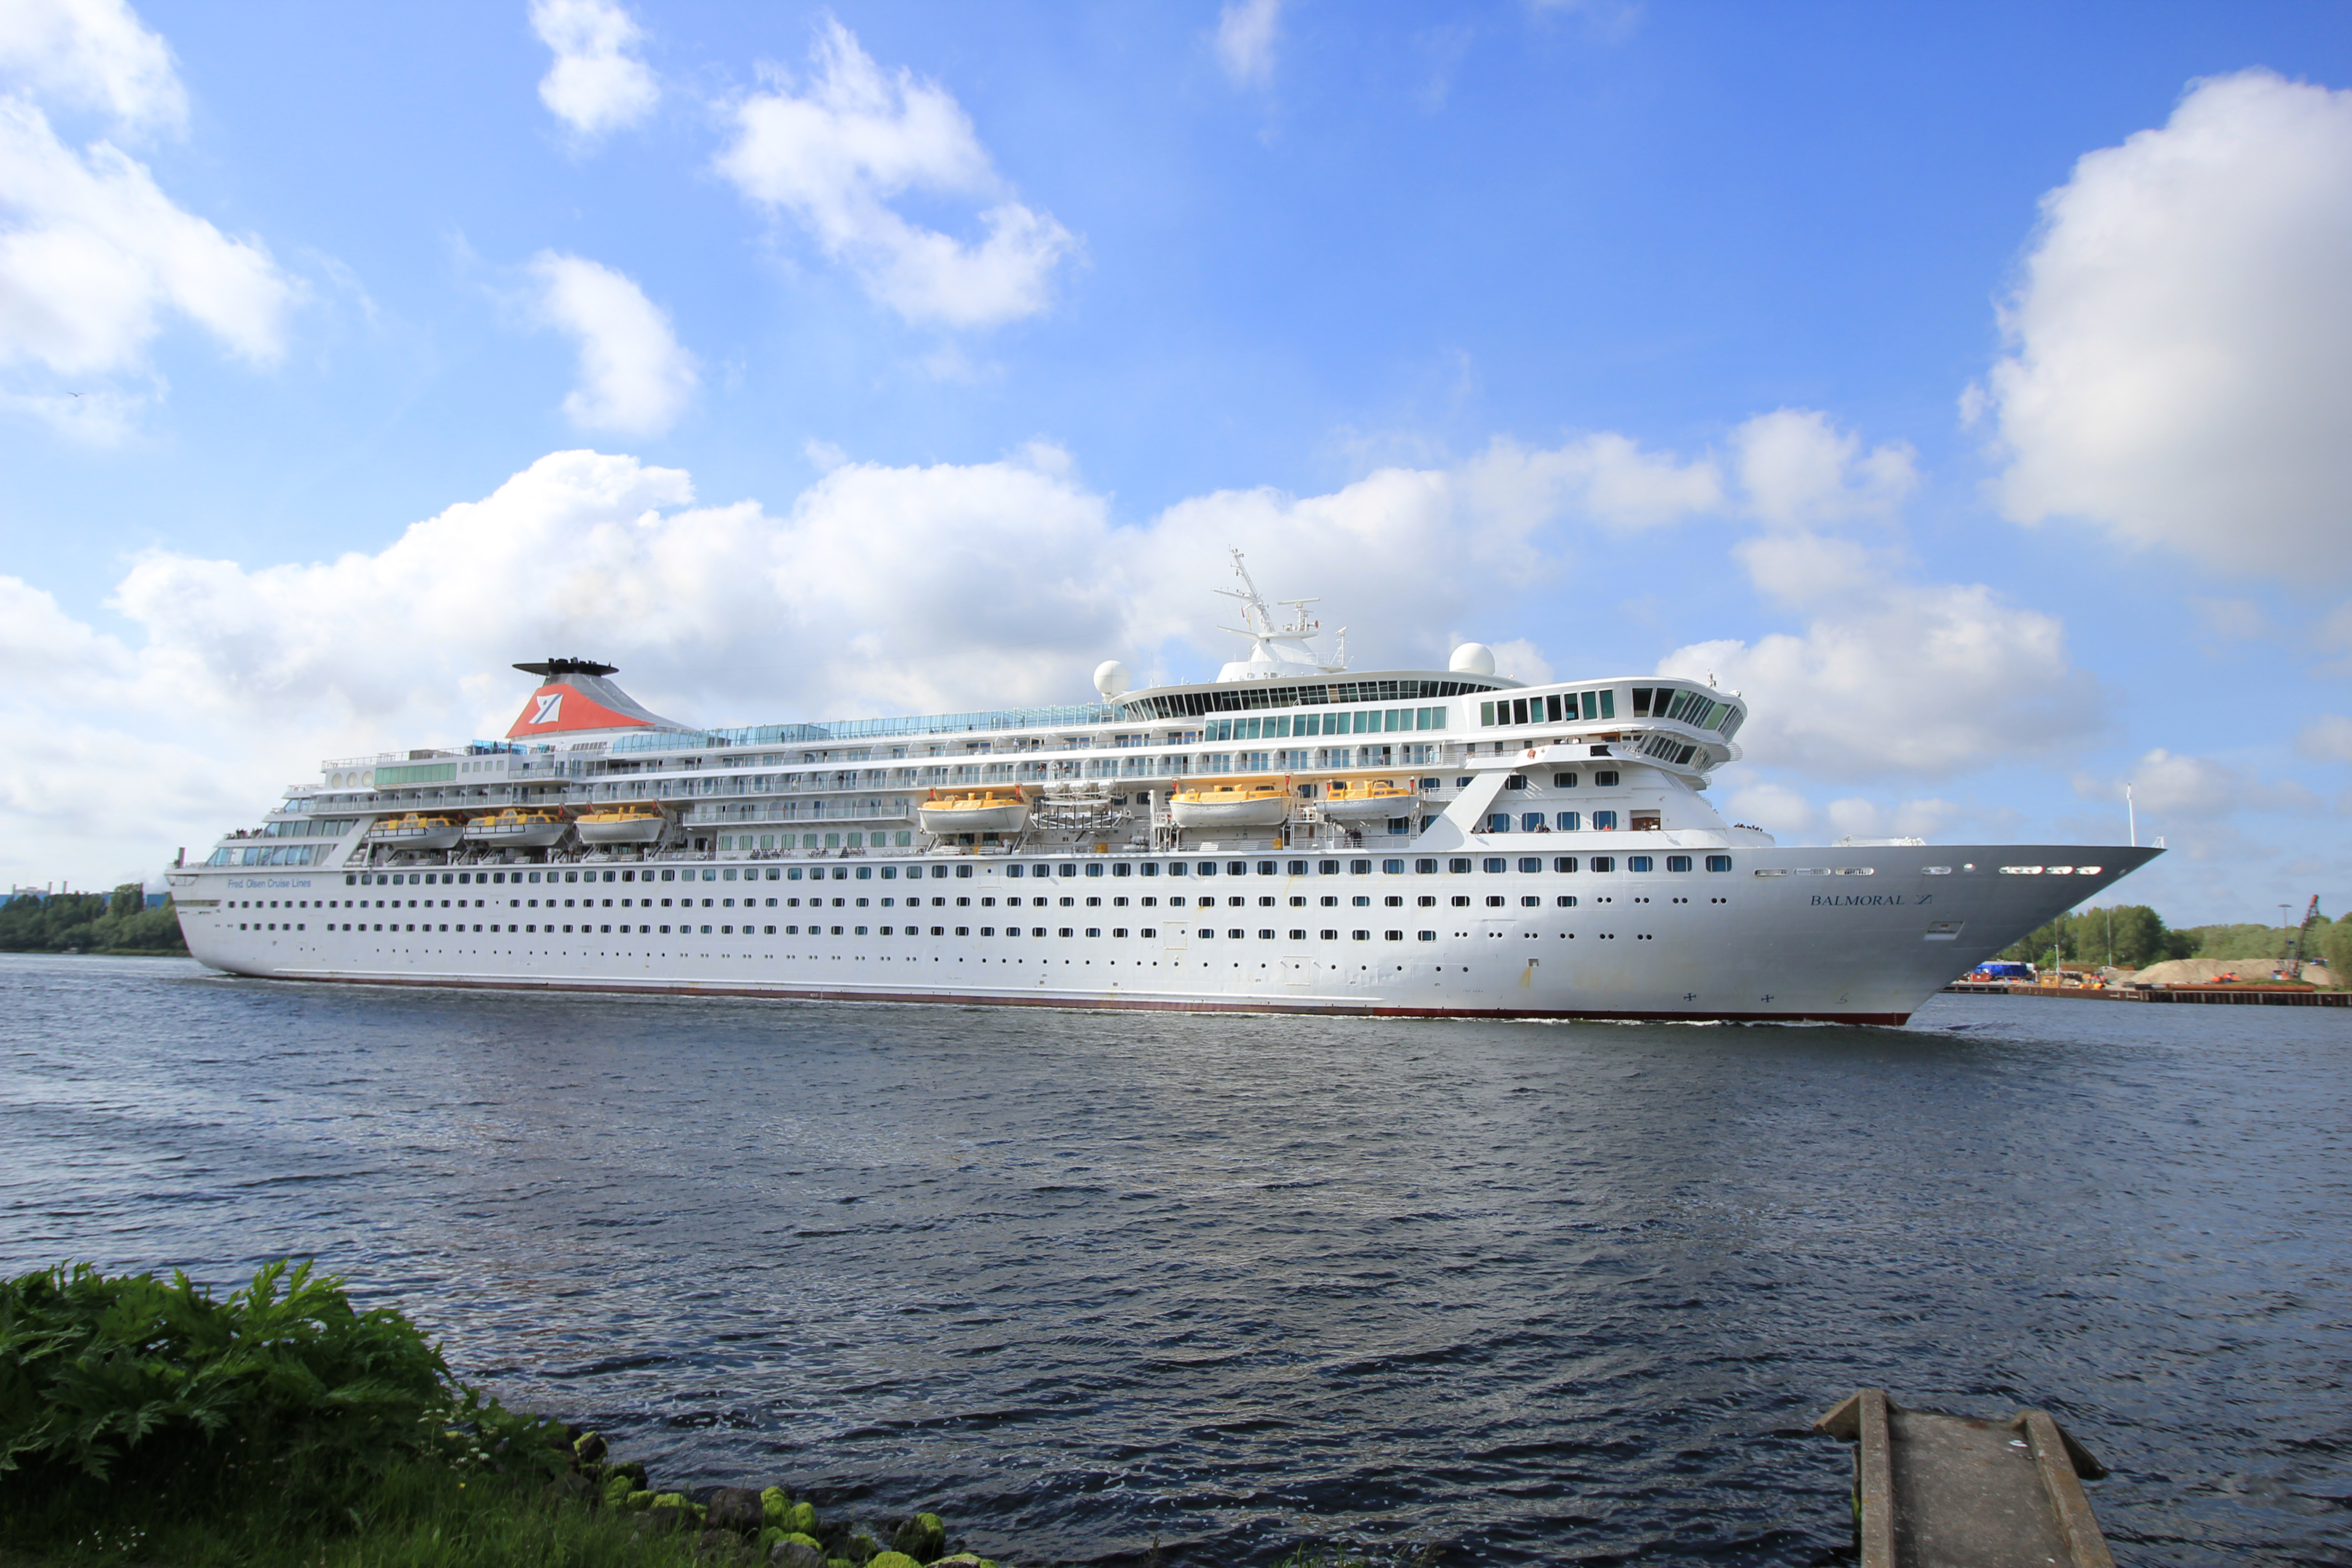 Balmoral Cruise Ship in the nEtherlands